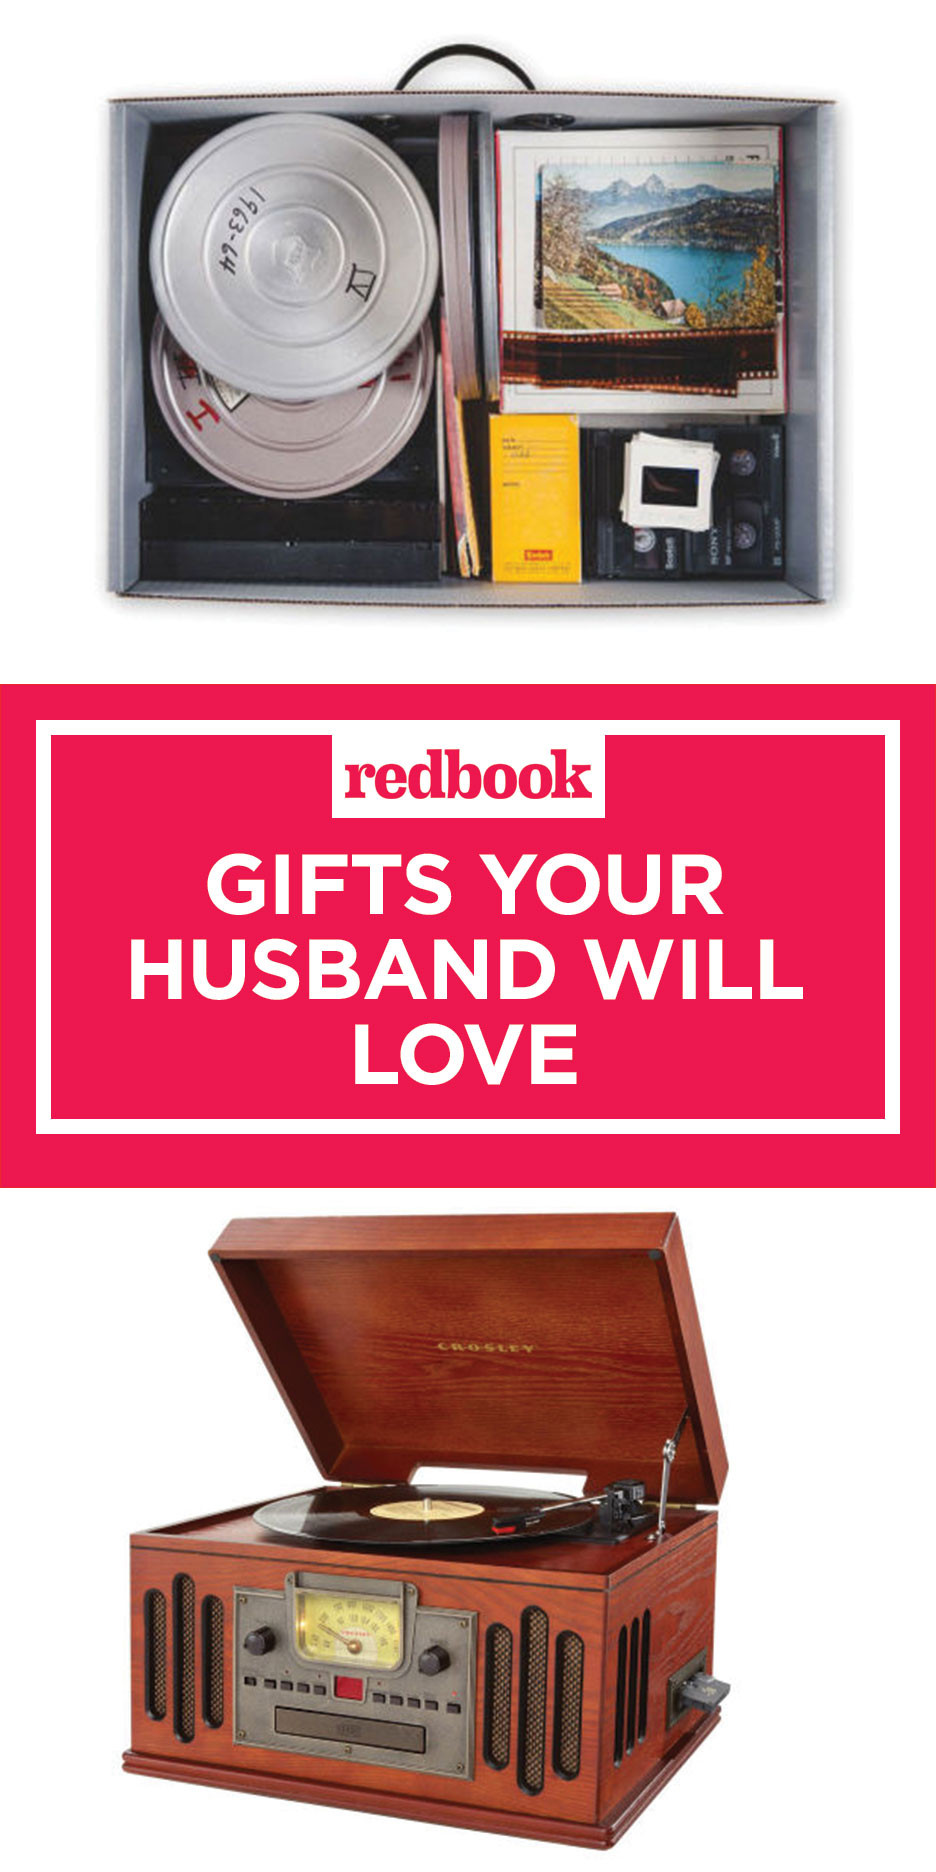 Holiday Gift Ideas For Husband
 36 Husband Gift Ideas Christmas Gifts for Husband